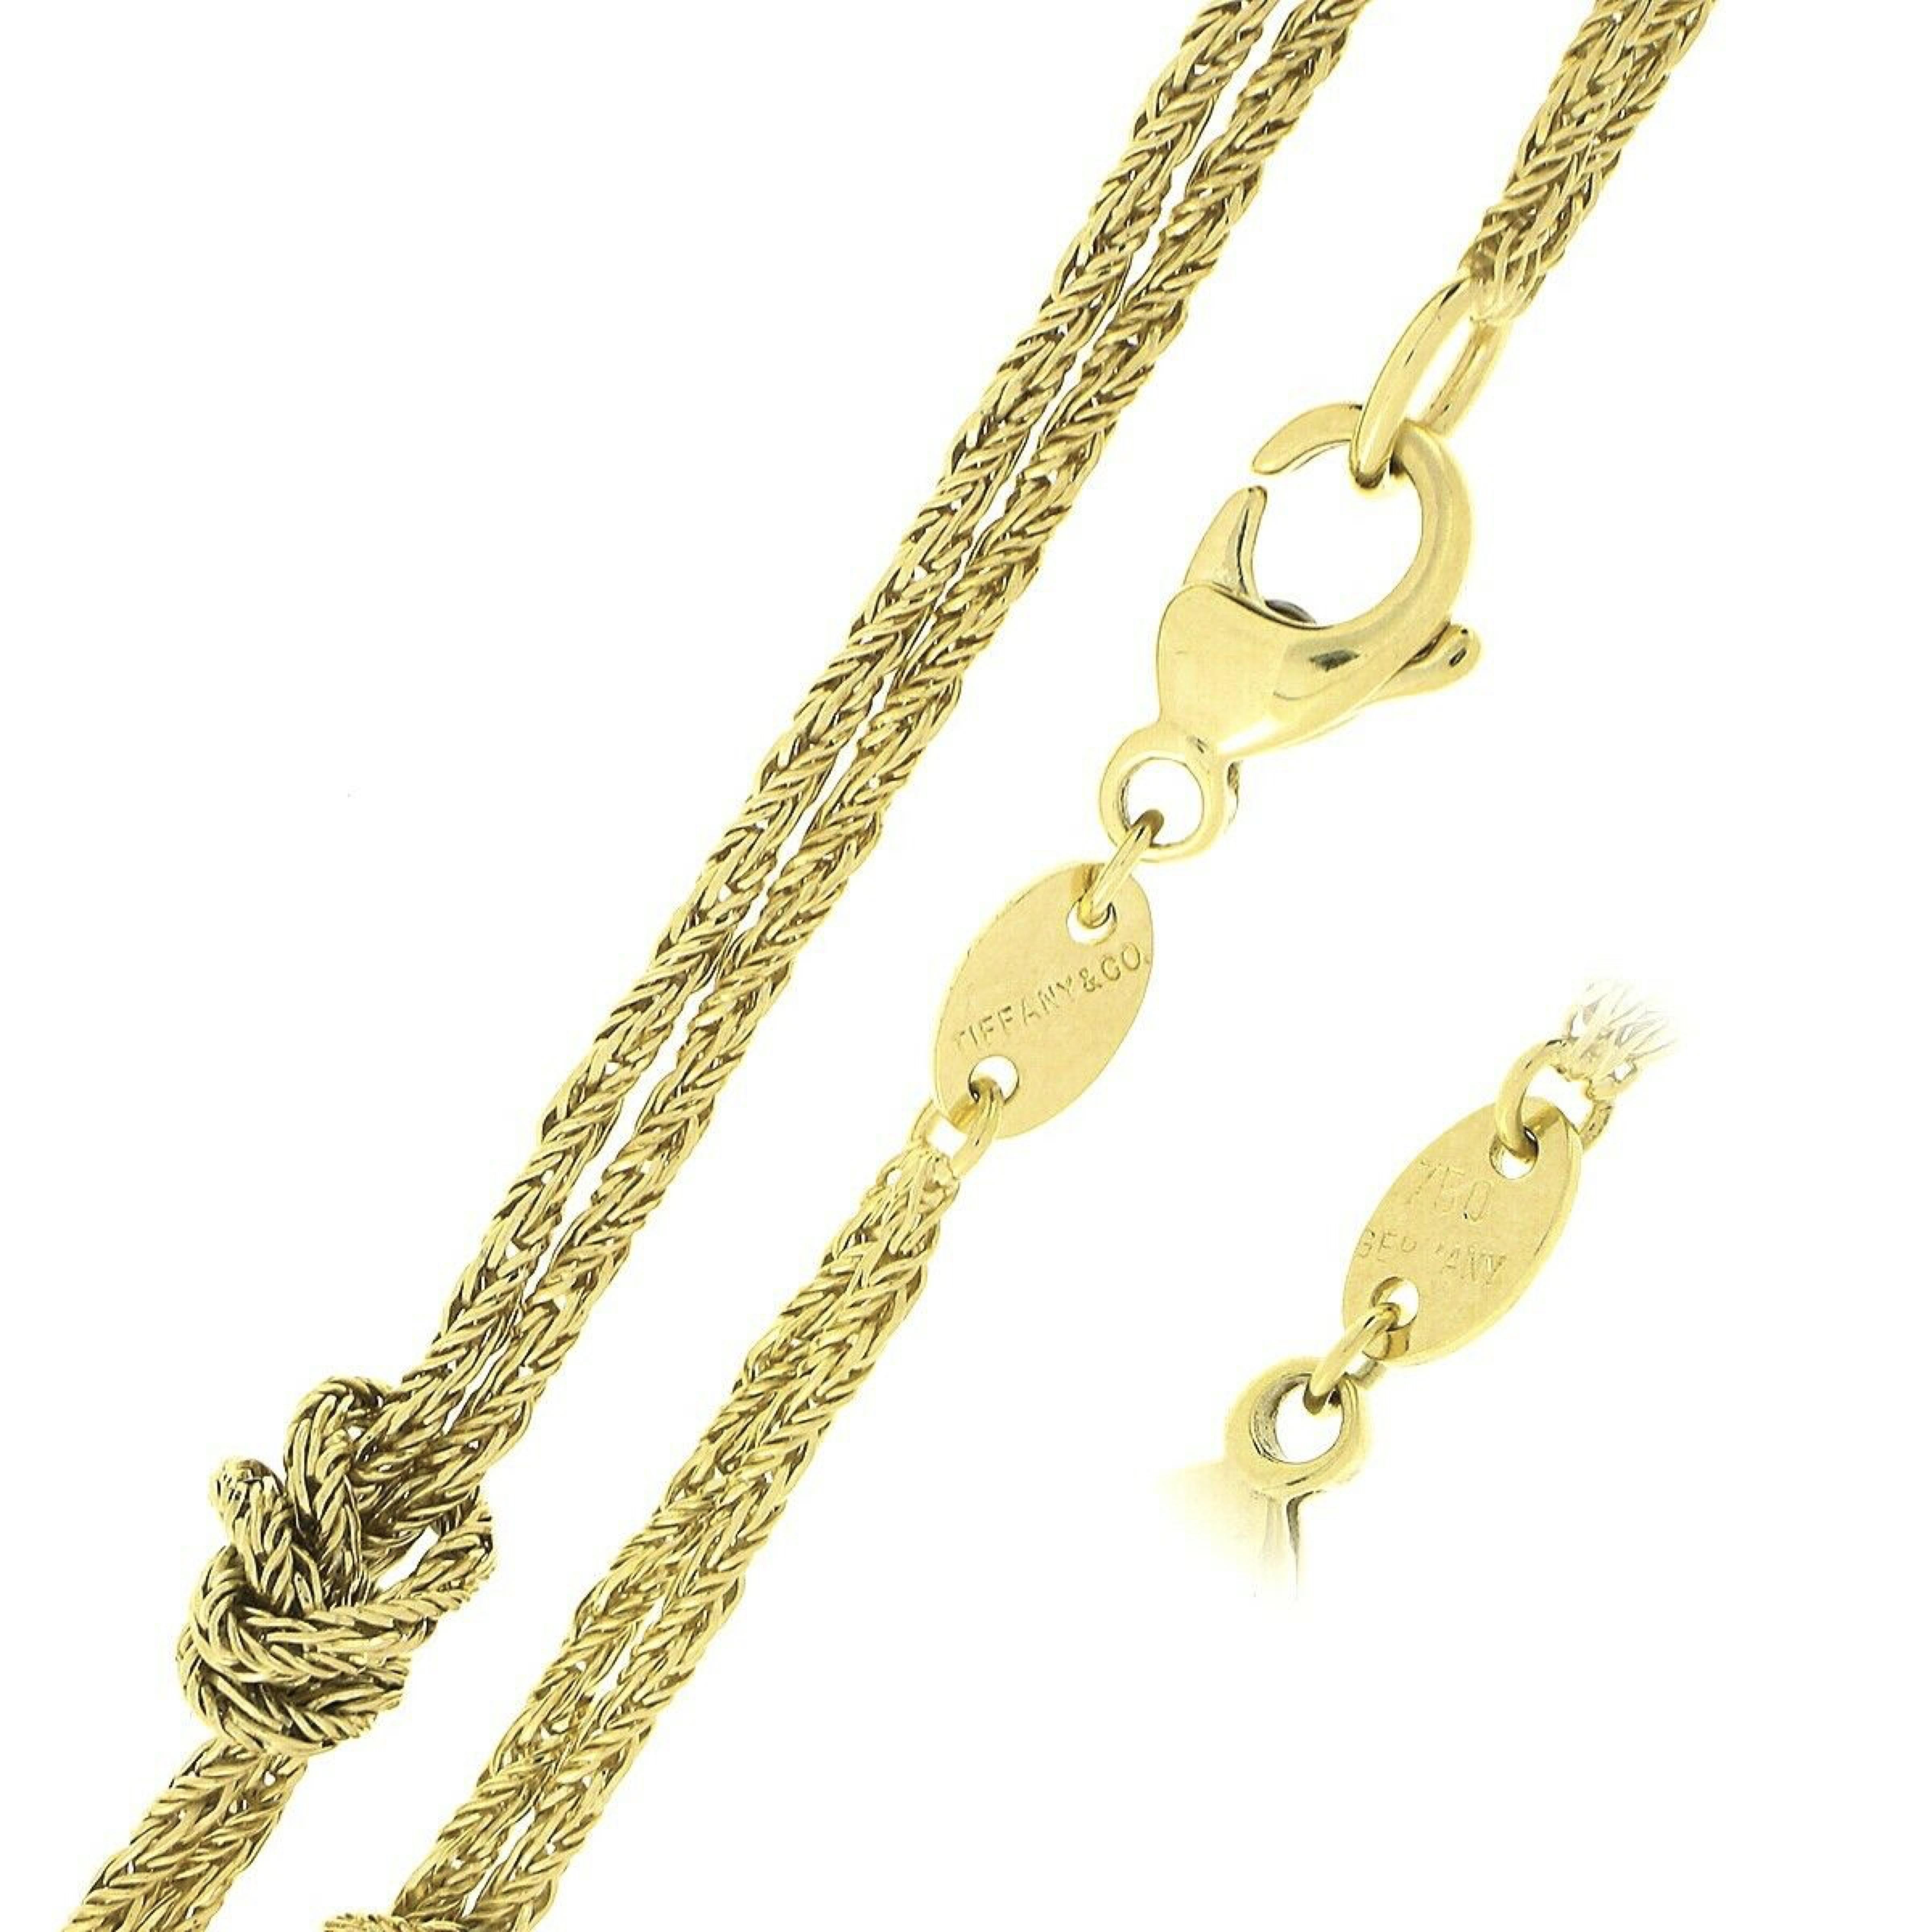 Retro Vintage Tiffany & Co. German 18k Gold Textured Woven Link w/ Knot Chain Necklace